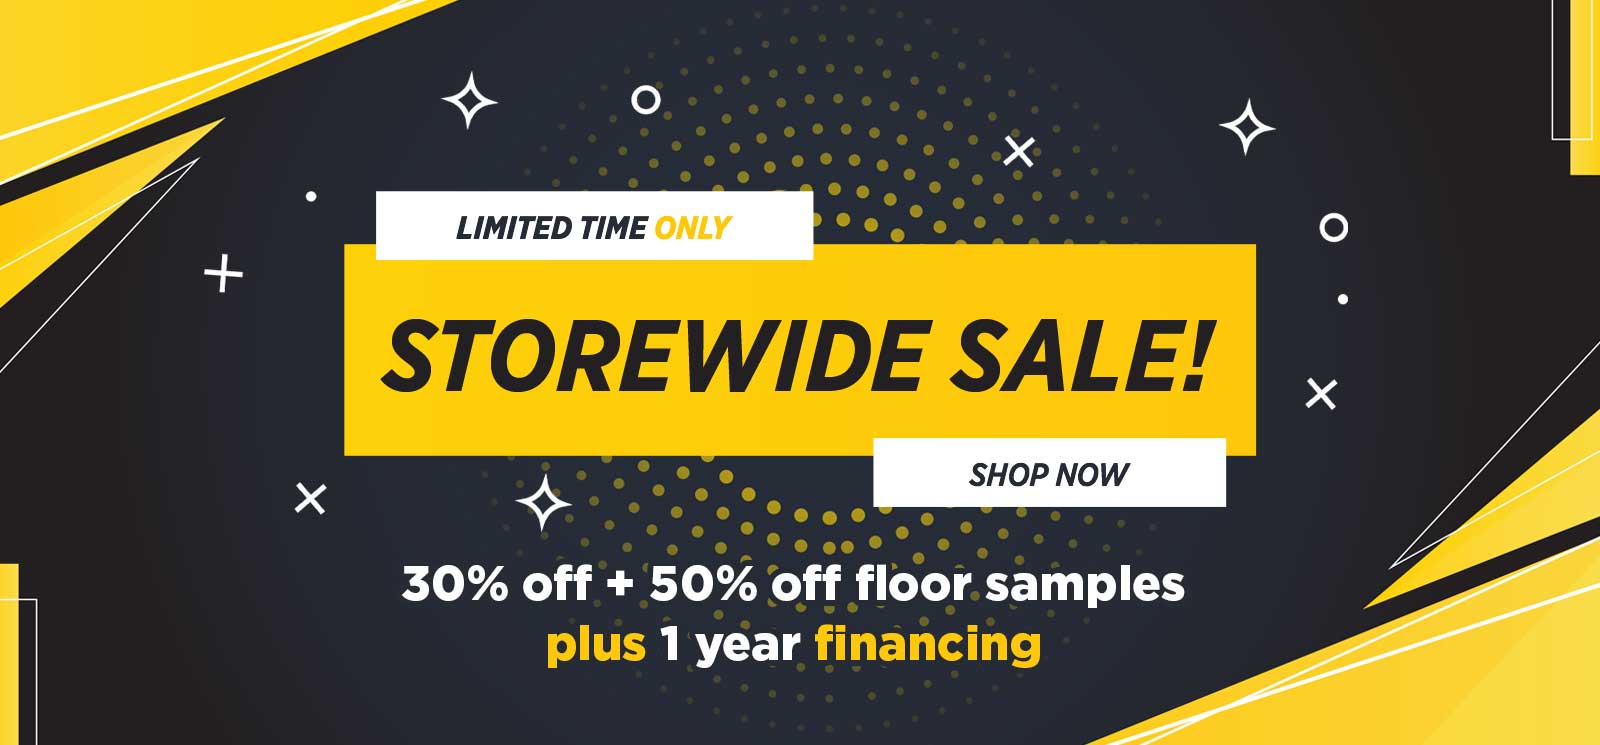 Storewide-Sale-Promotion_01-18-23 / 30% off + 50% off on floor samples plus  1 year financing